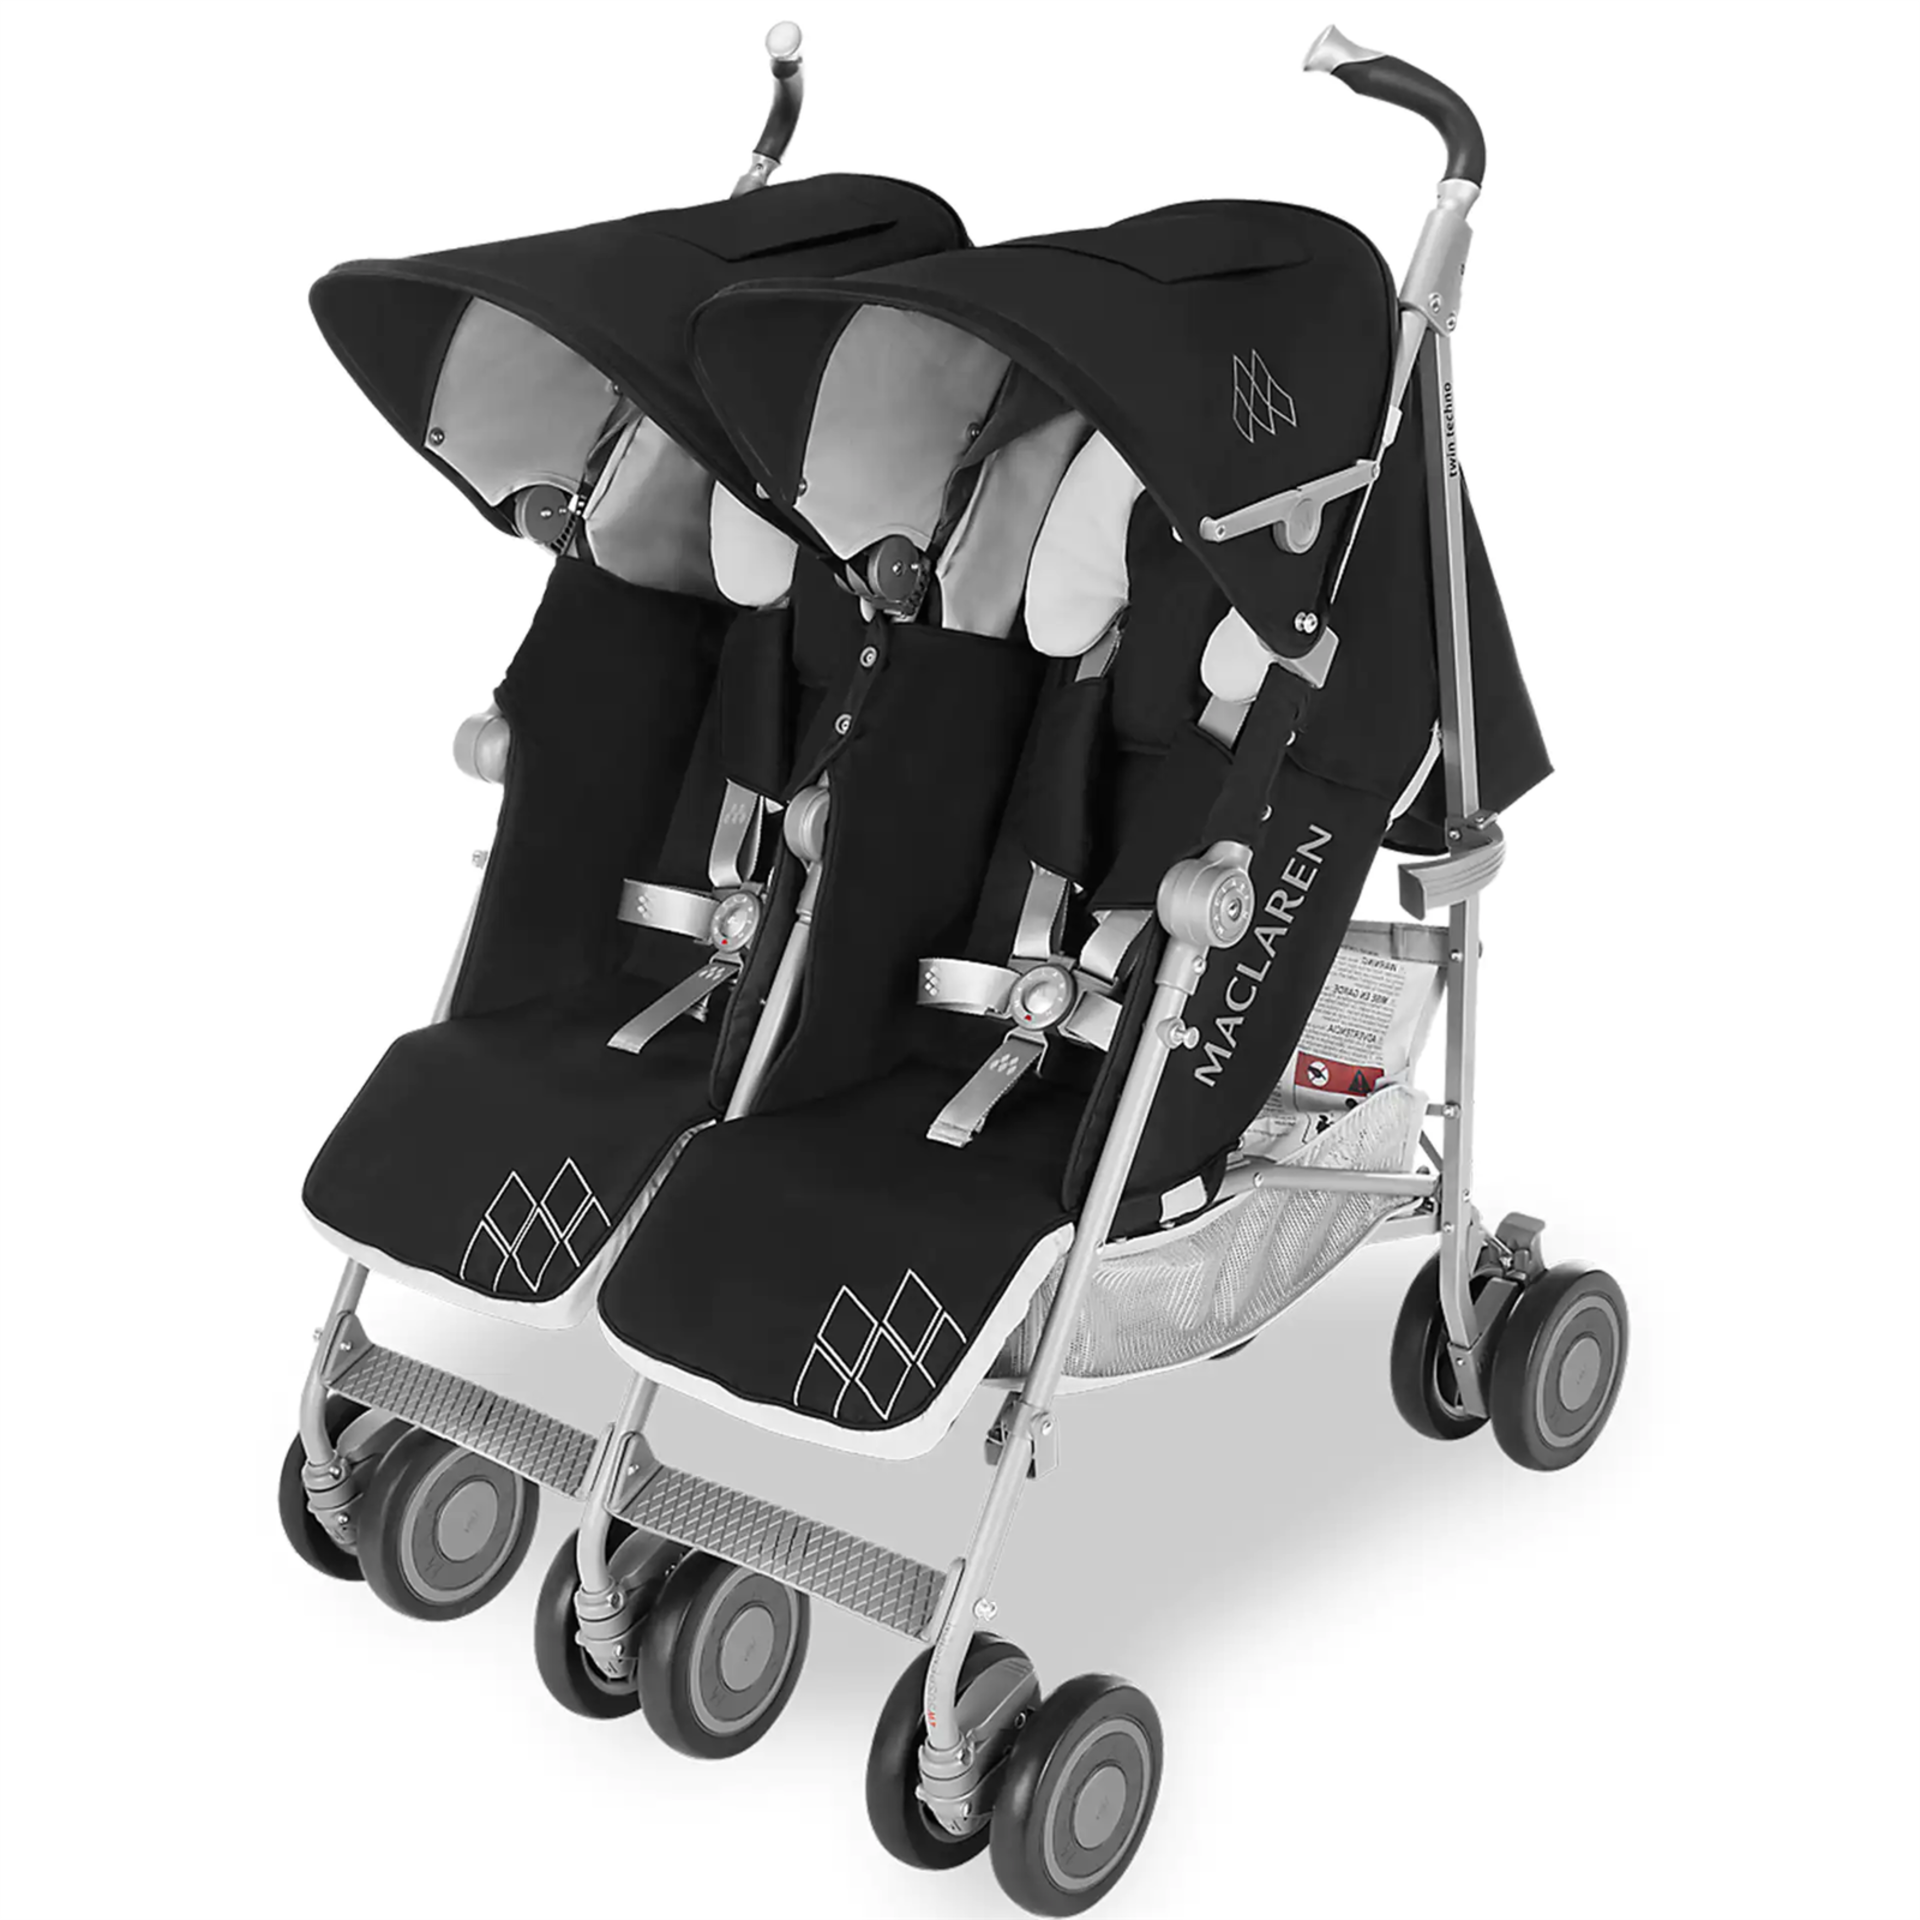 Maclaren Pushchair Twin Techno Black Built For Comfort/Performance For 2 - Image 6 of 7